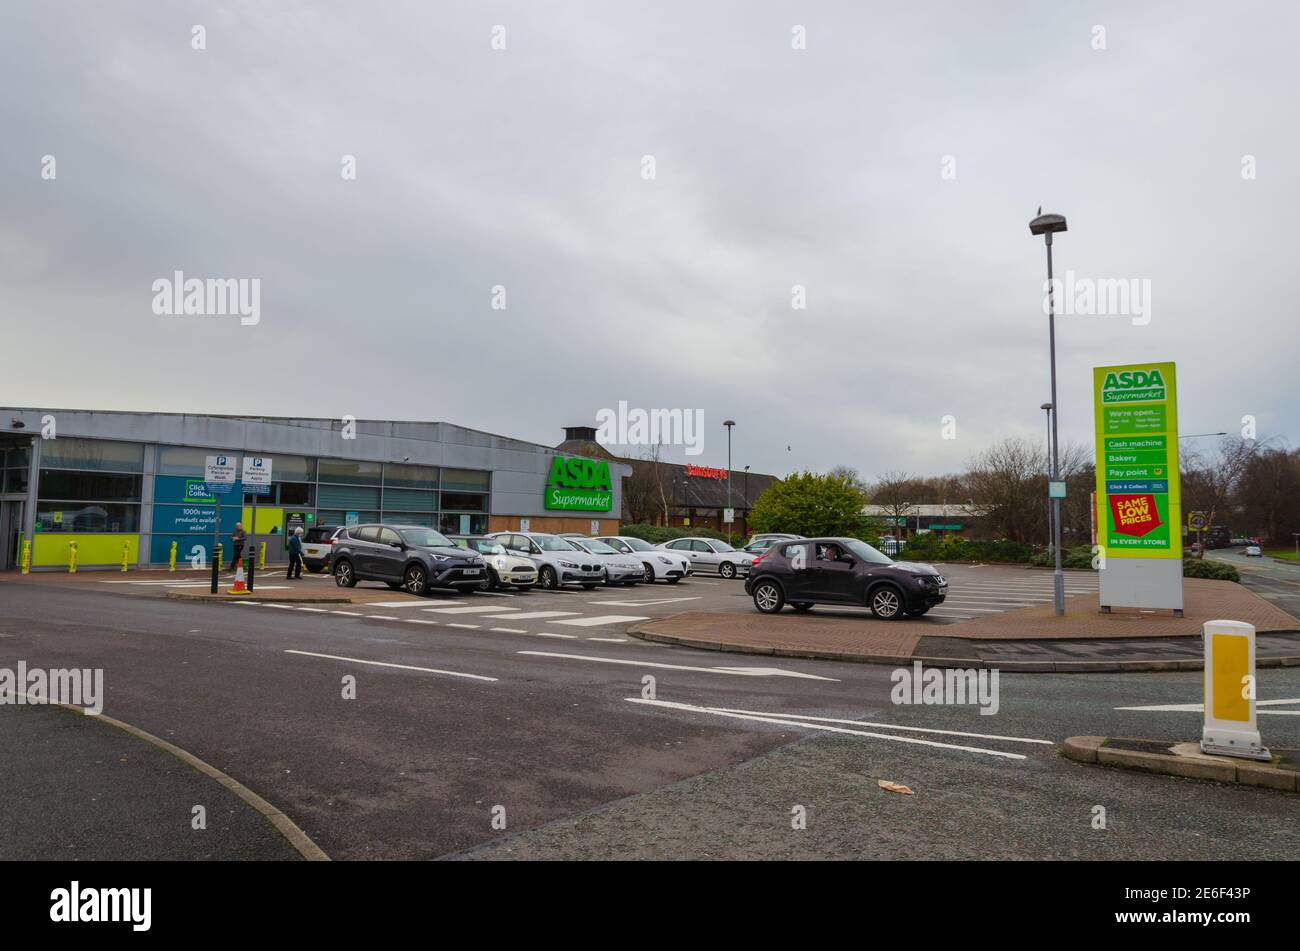 Flint; UK: Jan 28, 2021: Cars parked in front of Asda supermarket which is located beside a Sainsbury's supermarket. Stock Photo